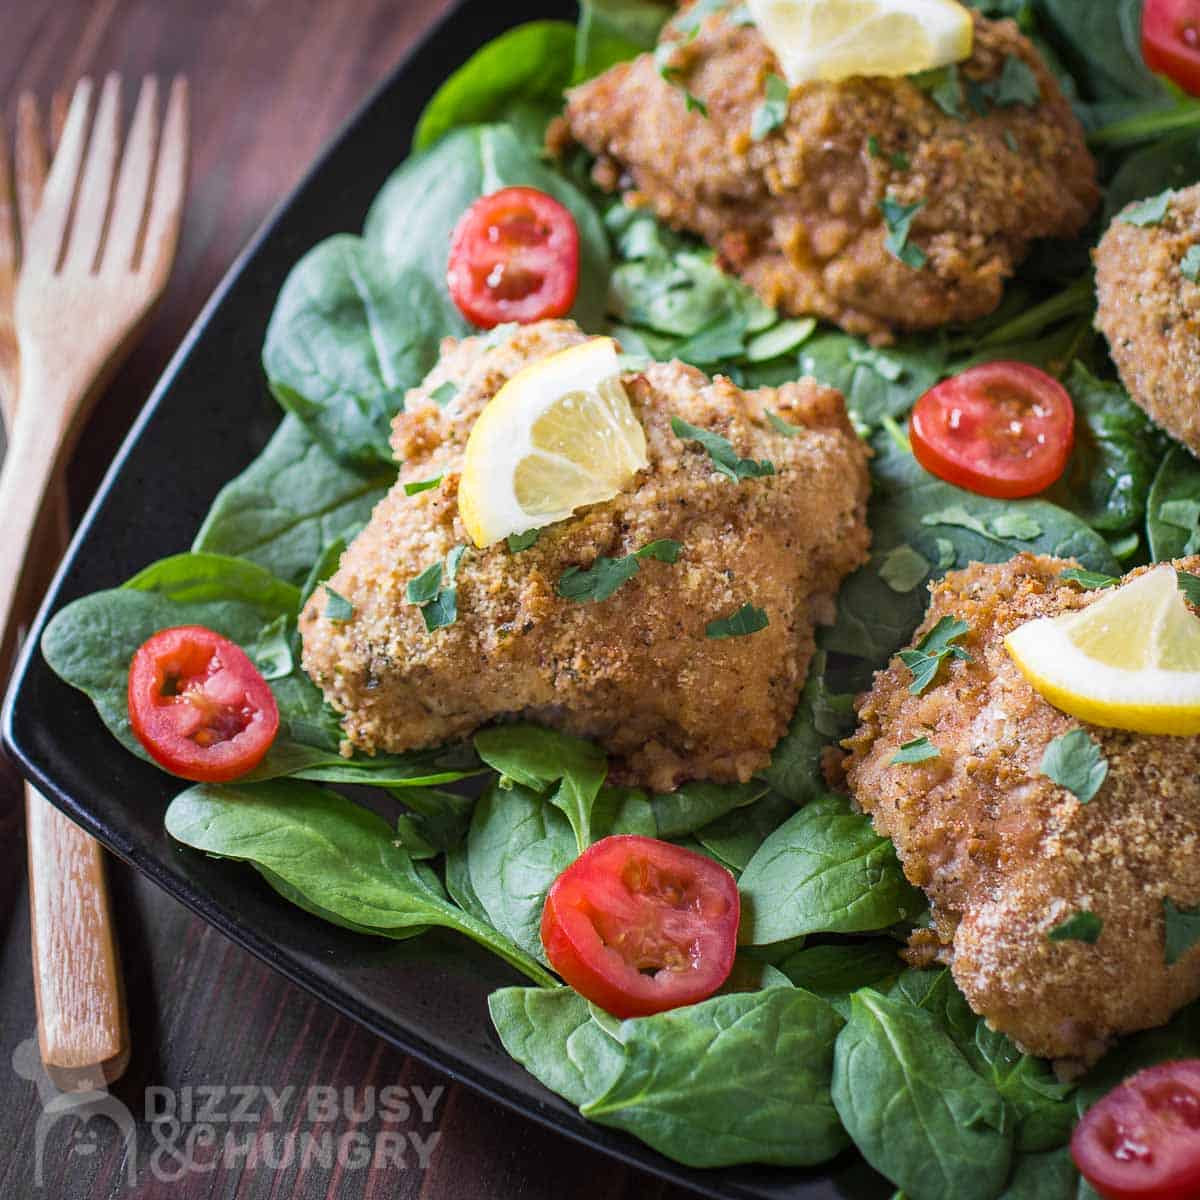 Side shot of multiple pieces of breaded chicken garnished with herbs and a lemon wedge on a bed on spinach and sliced tomatoes on a black plate with wooden forks on the side on a wooden surface.